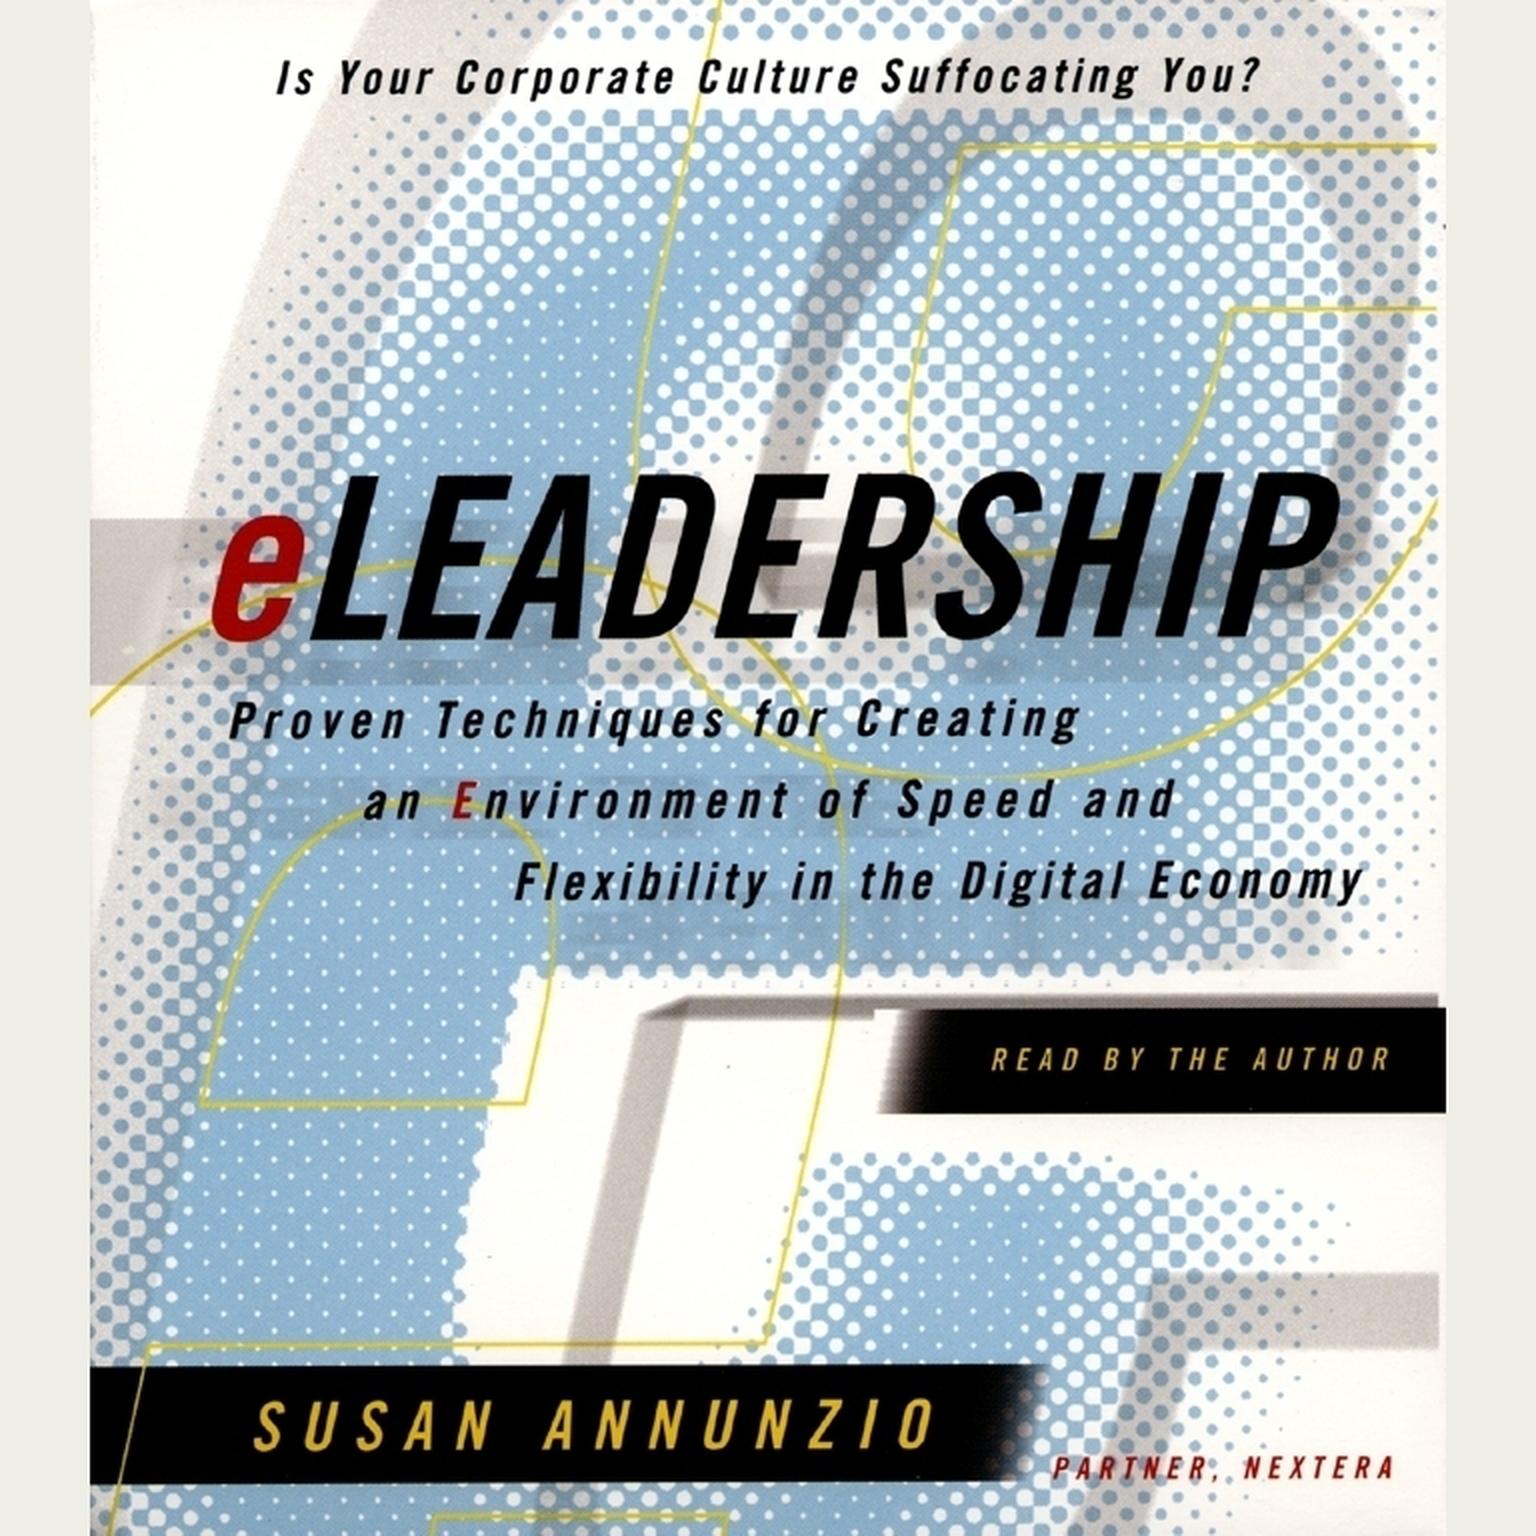 eLeadership (Abridged): Proven Techniques for Creating an Environment of Speed and Flexibility in the Digital Economy Audiobook, by Susan Annunzio